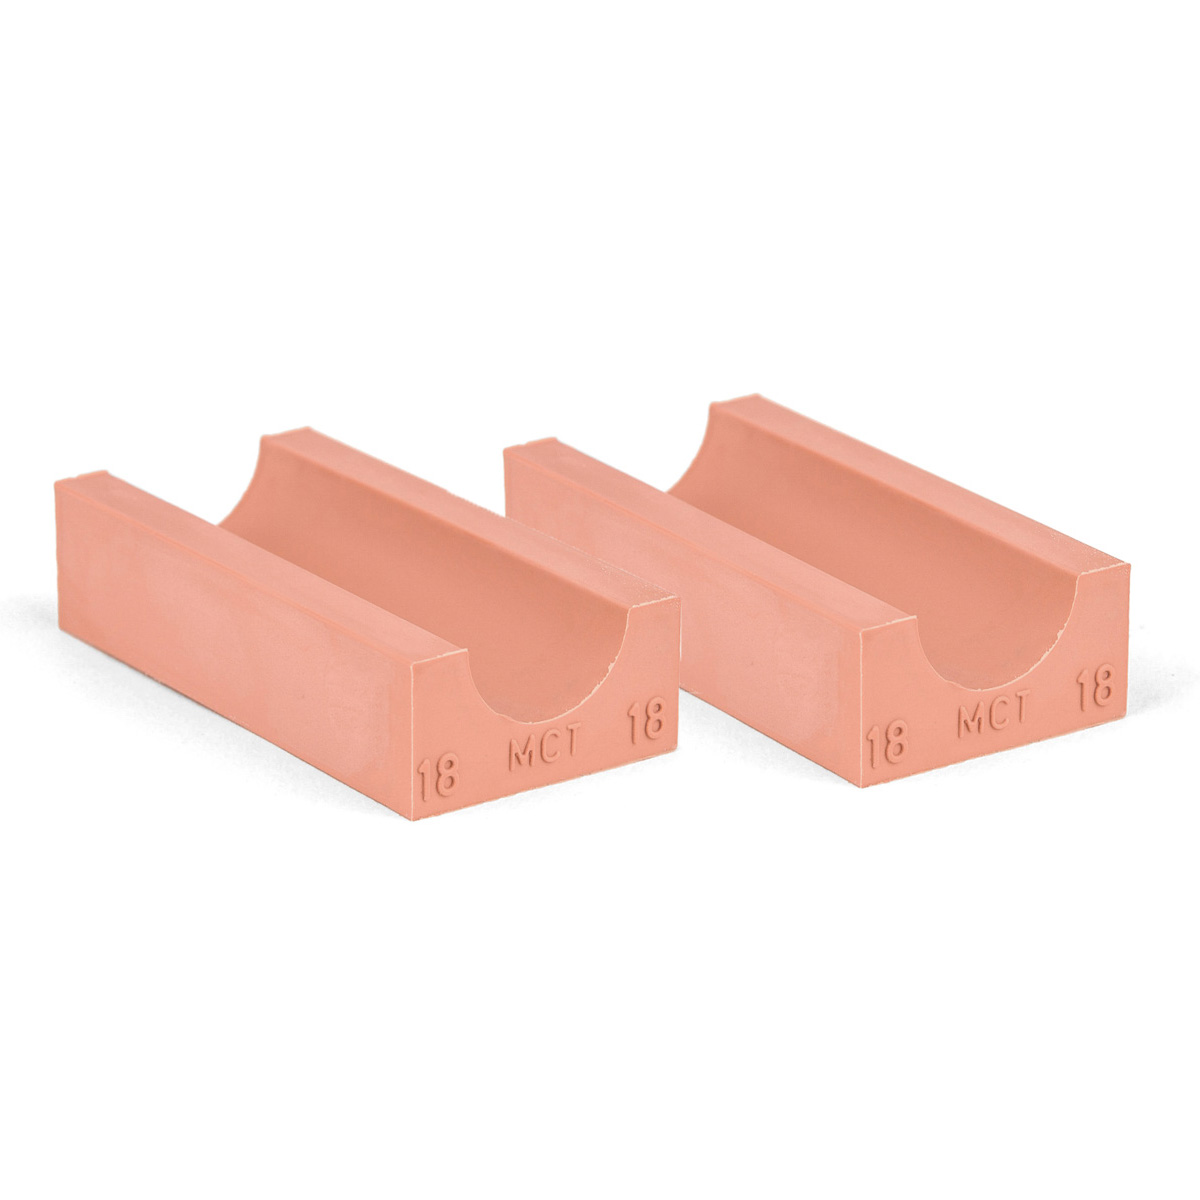 30-18*2 Set of 2 half insert block lycron, 30-18 for cable/pipe diam. 17.5-18.5mm